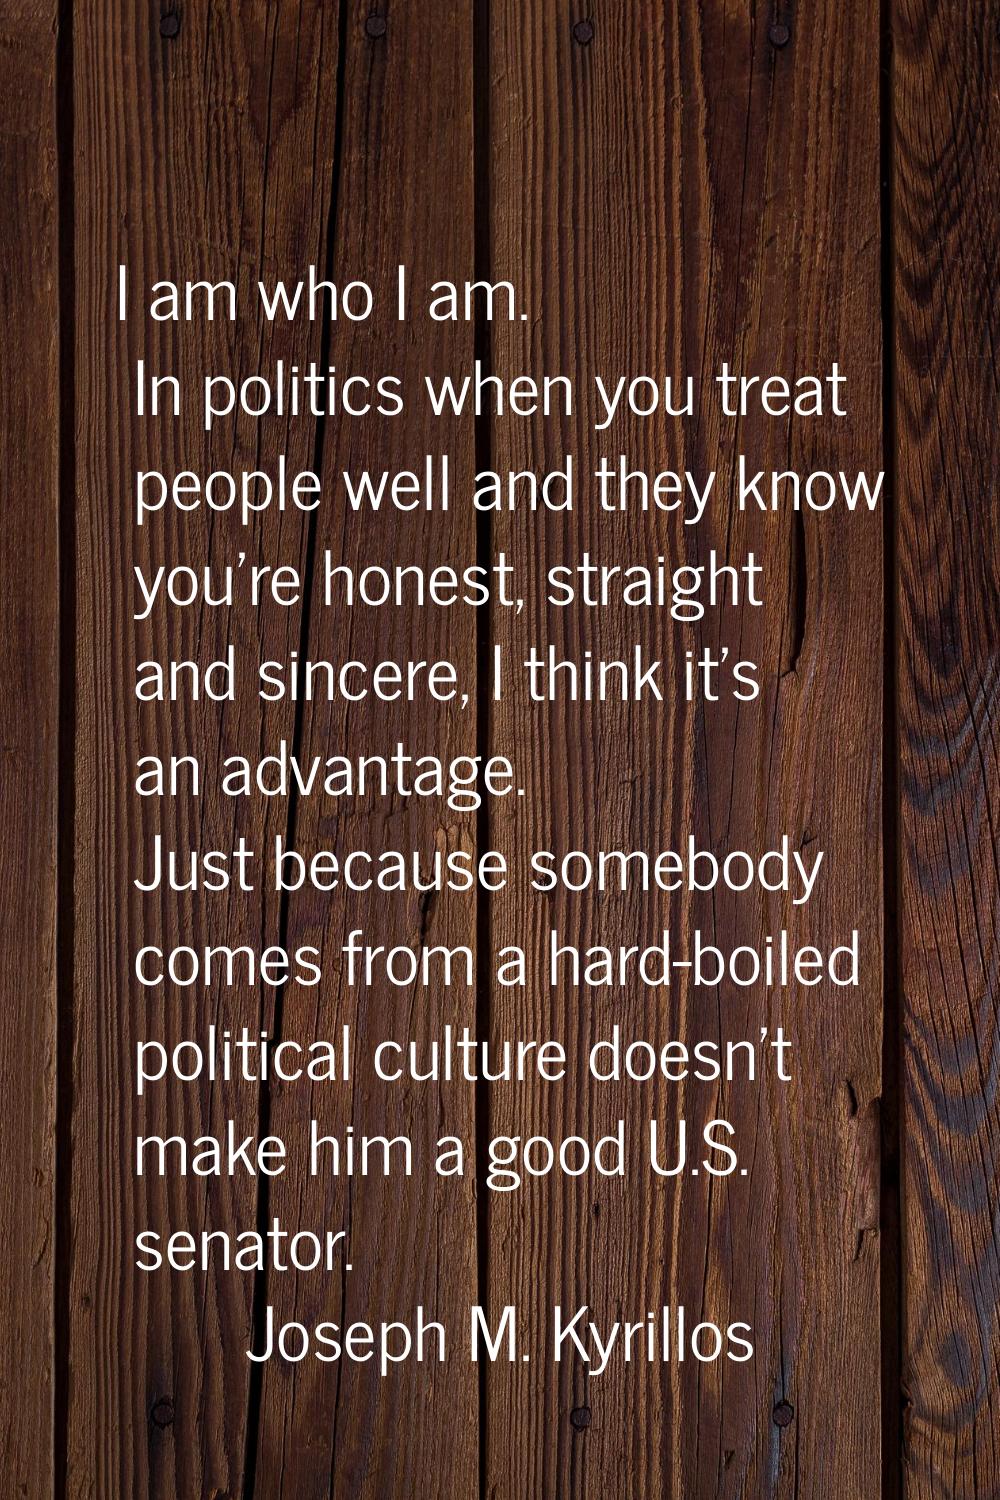 I am who I am. In politics when you treat people well and they know you're honest, straight and sin